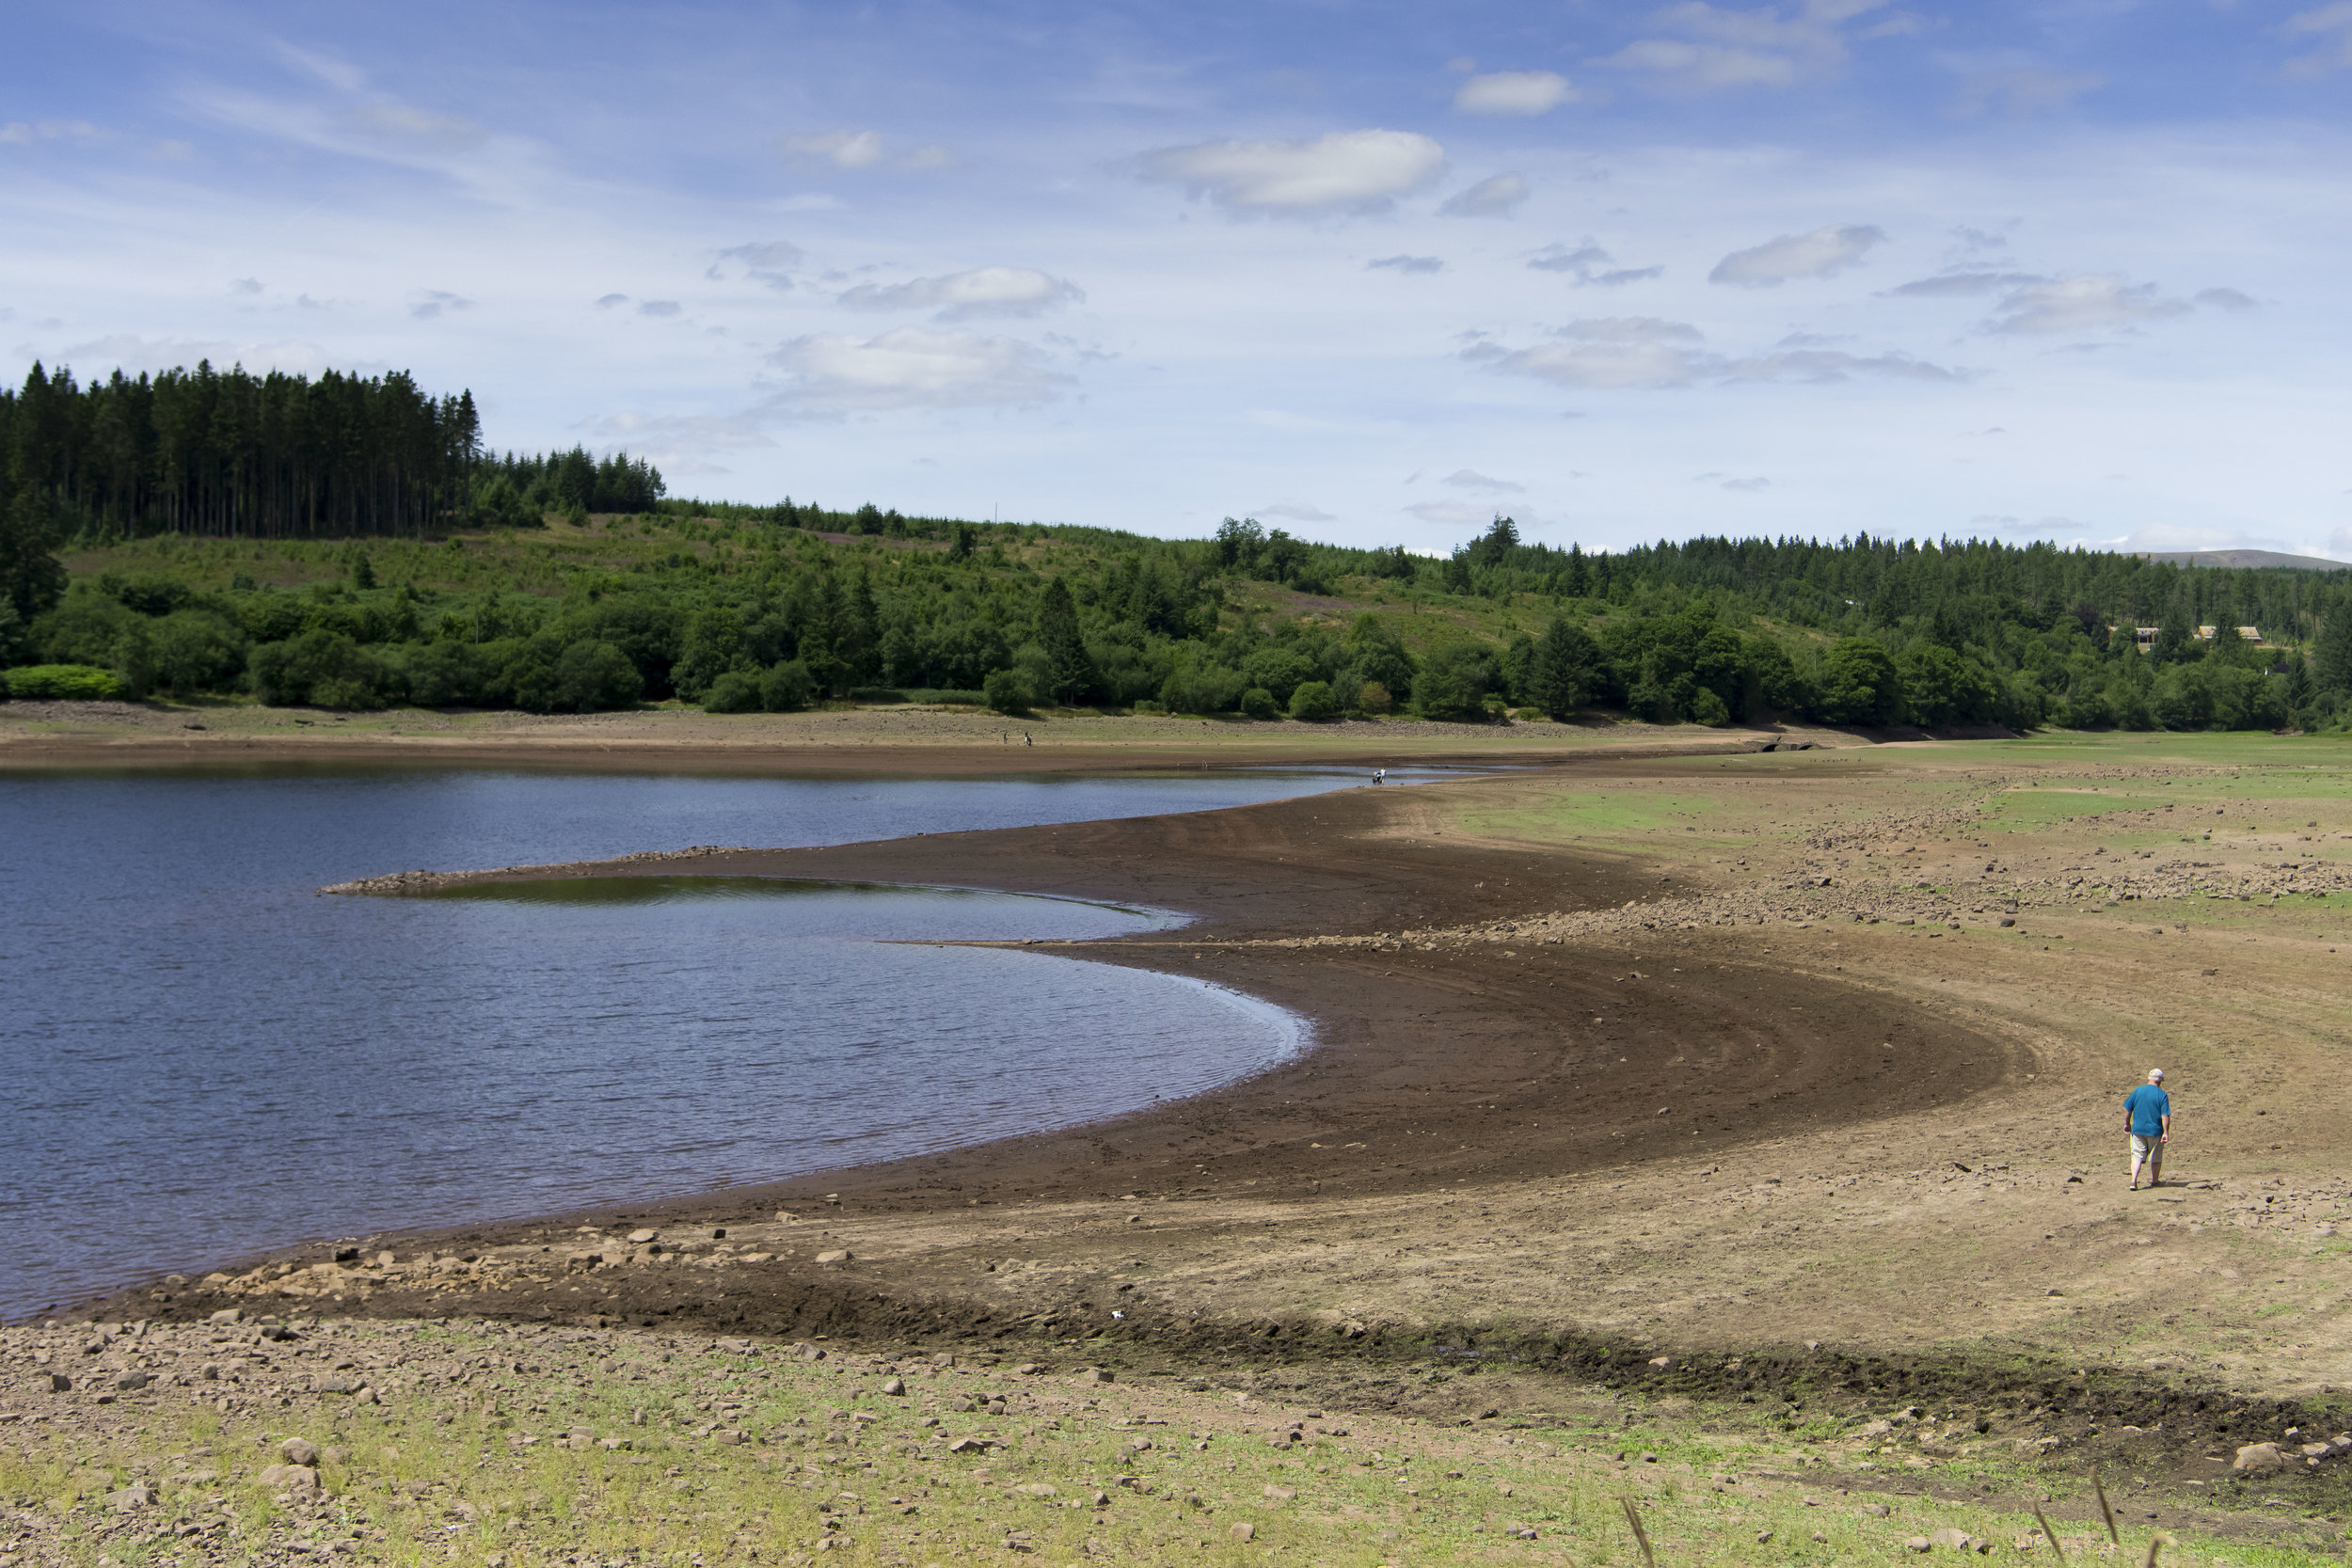  MERTHYR TYDFIL, WALES - JULY 25: A general view of the Llwyn-on Reservoir, owned by Welsh Water, in the Taf Fawr valley on July 25, 2018 in Merthyr Tydfil, Wales. The lack of rainfall over the last few weeks combined with record breaking temperature